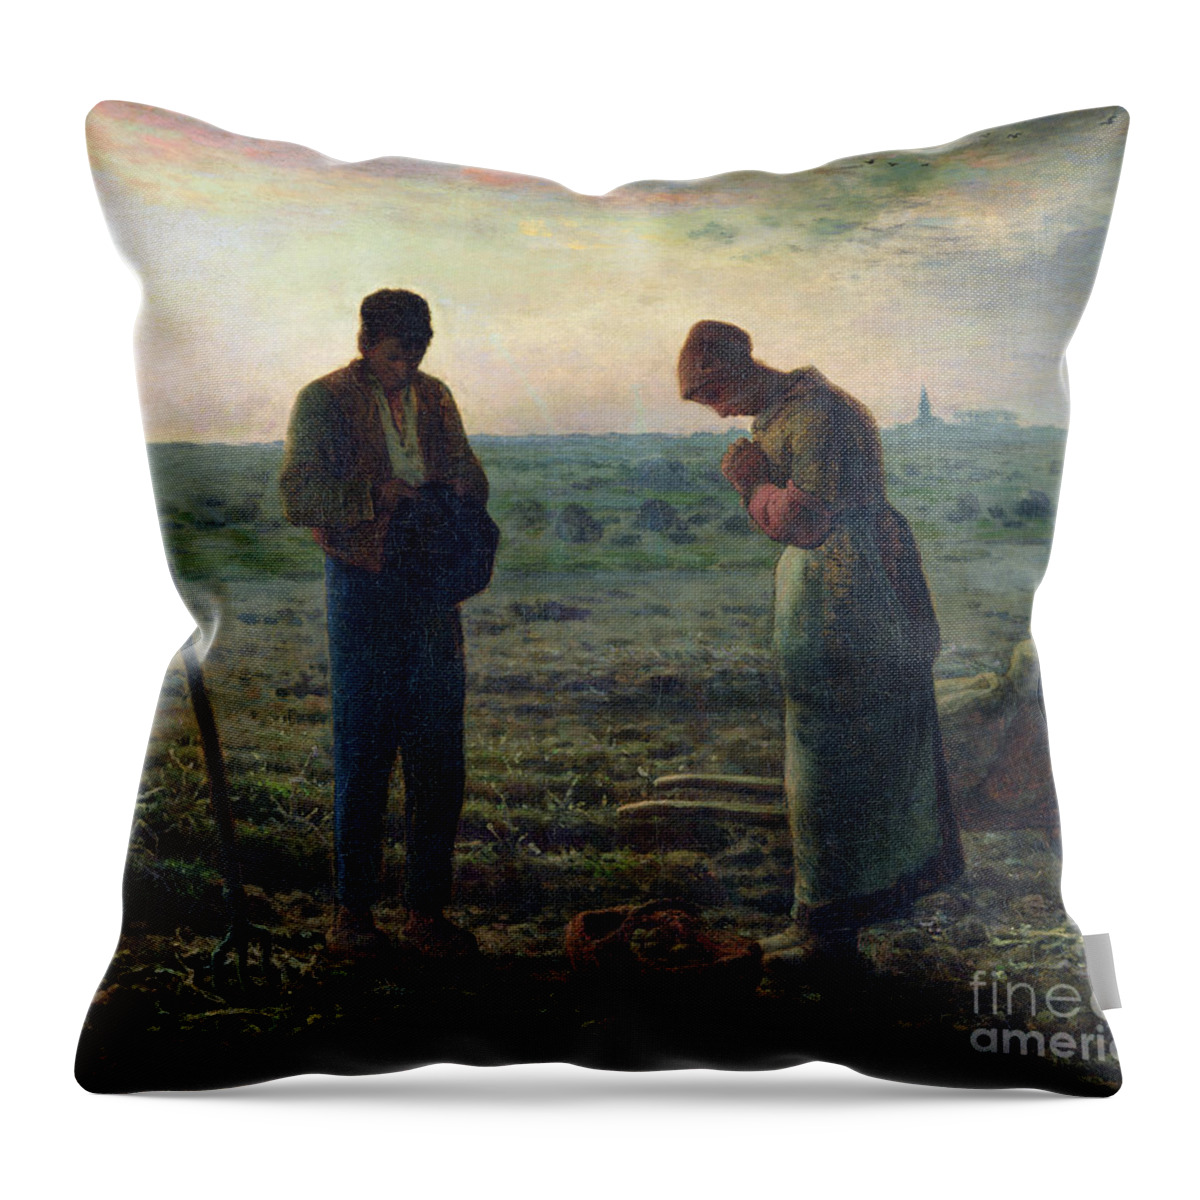 The Throw Pillow featuring the painting The Angelus by Jean-Francois Millet